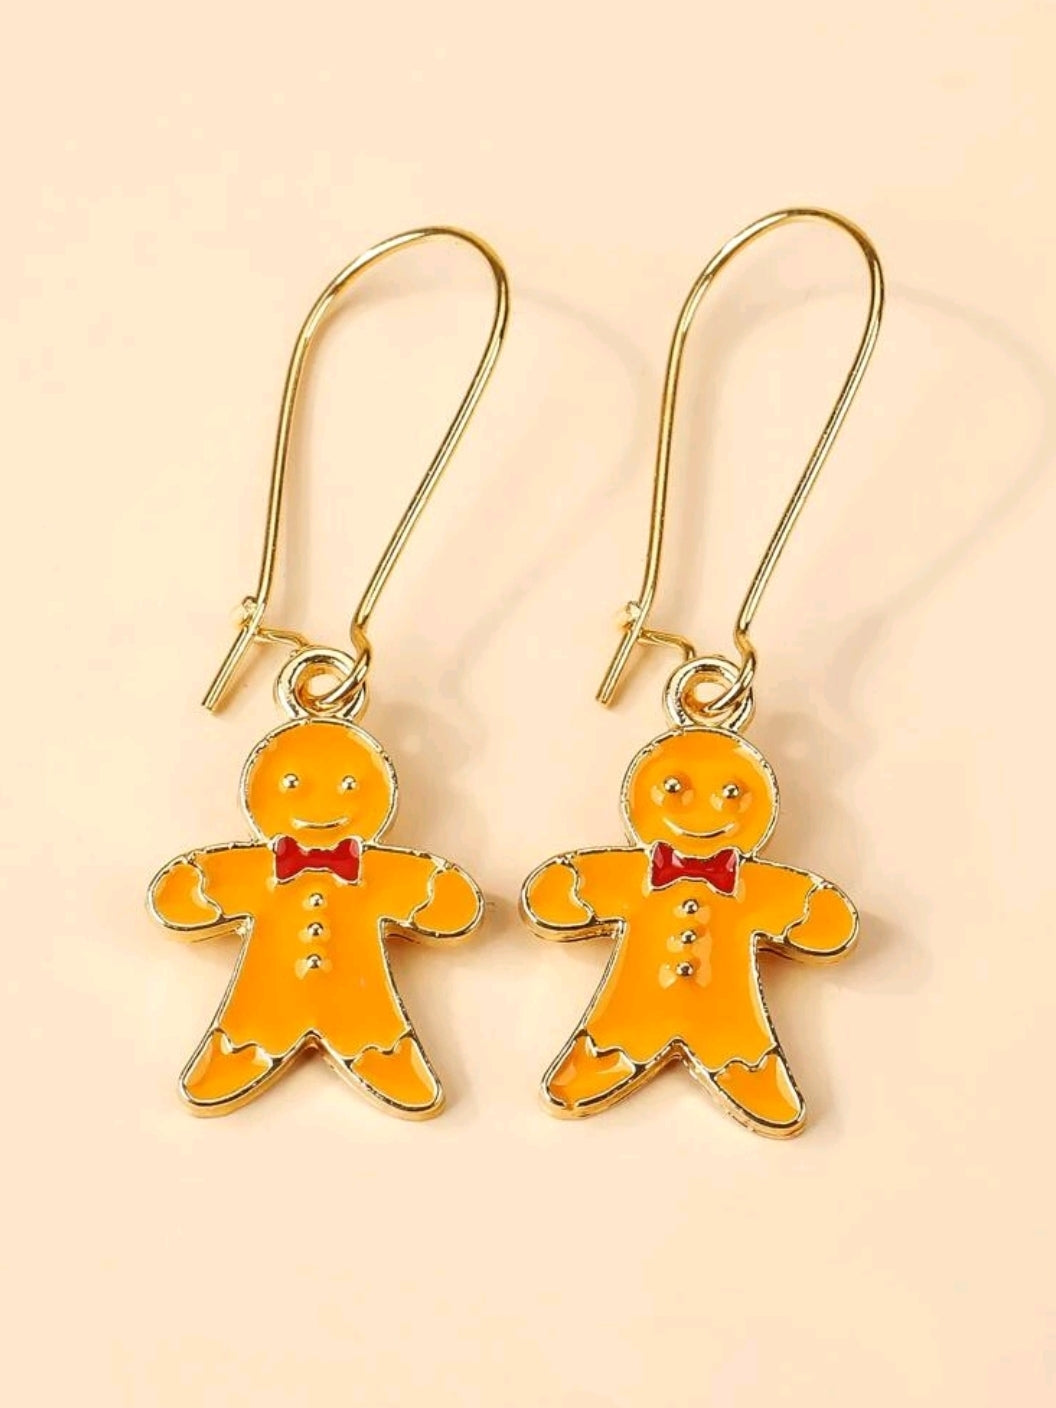  Funny couple of Christmas Gingerbread Man Drop earrings. Unisex accessory. Lovely gift idea. Festive outfit!      Metal Color: Gold     Material: Alloy     Color: Orange     Type: Dangle     Style: Glamorous Casual     Size: Eardrop Height 3.5 cm (1.4 inch ) X Eardrop Width 1.5 cm (0.6 inch)